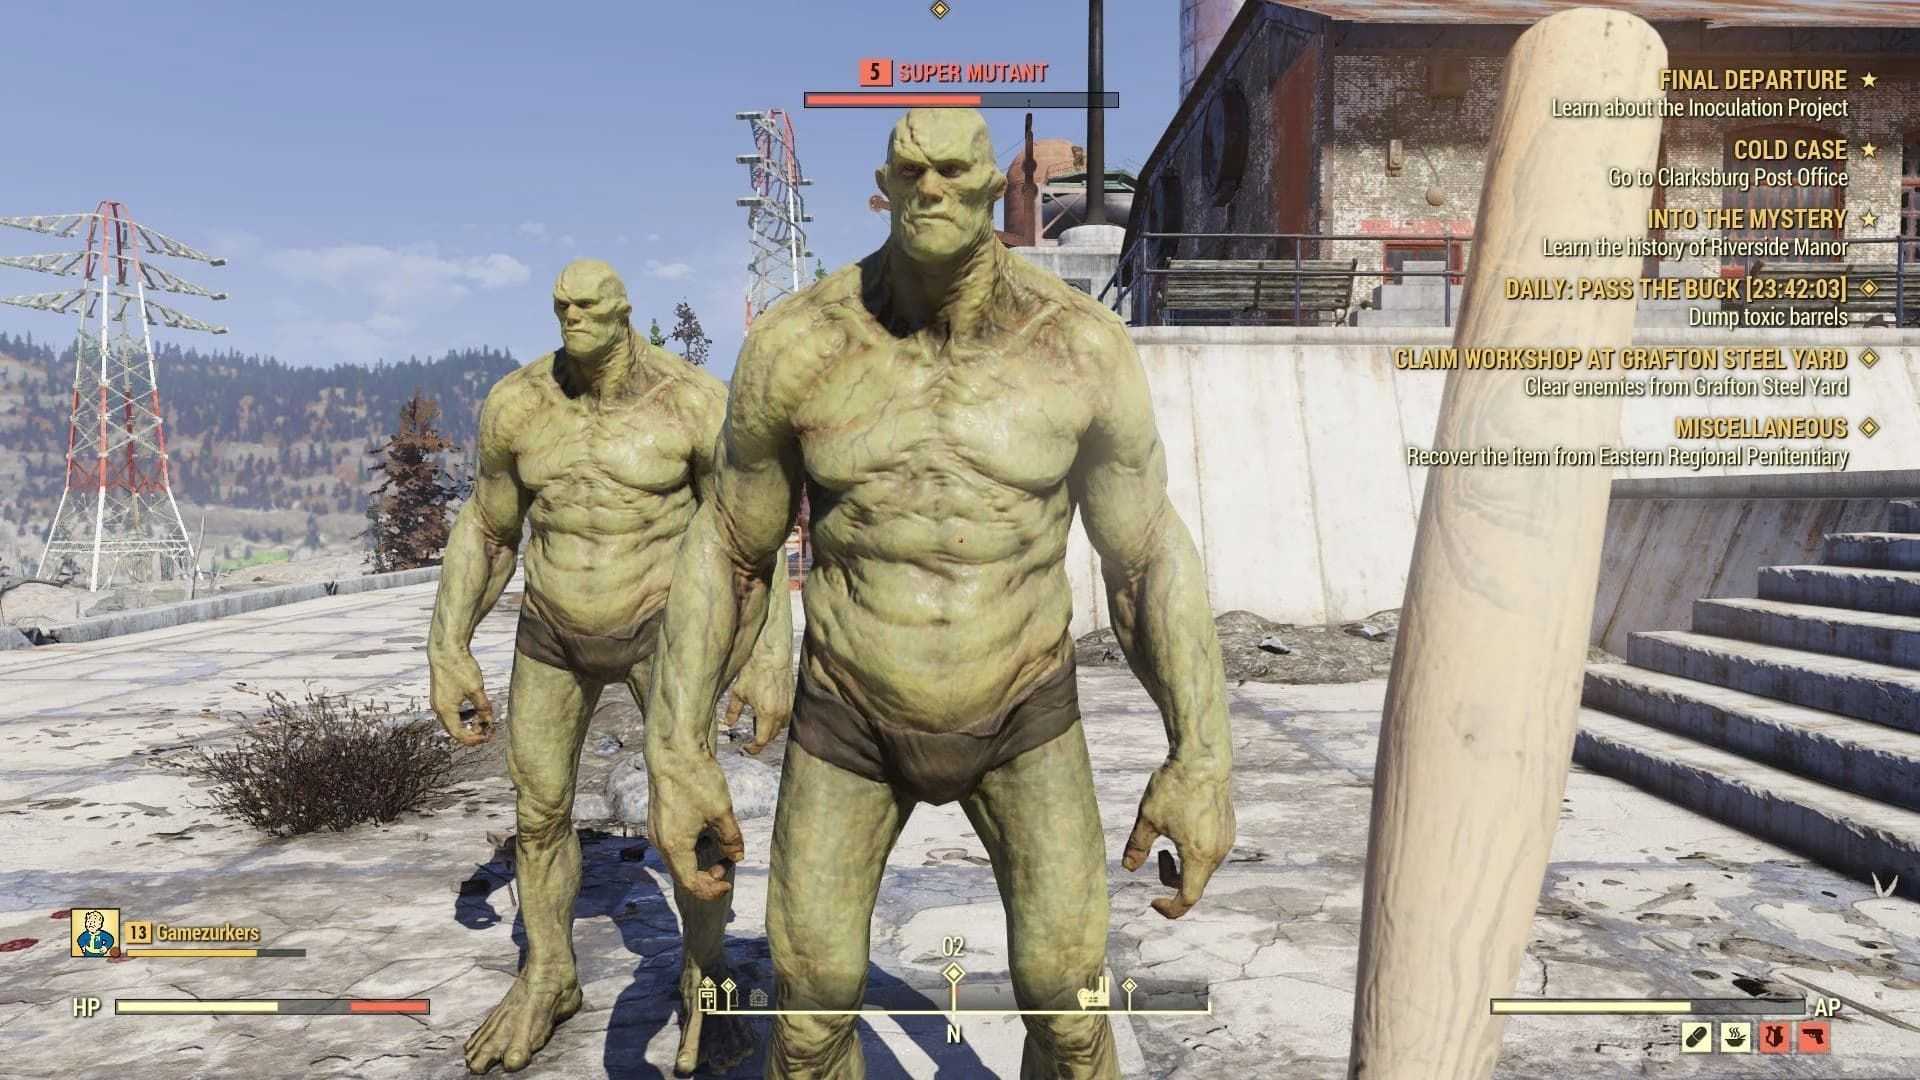 There are a large number of Super Mutants roaming around Appalachia in Fallout 76 (Image via Bethesda)